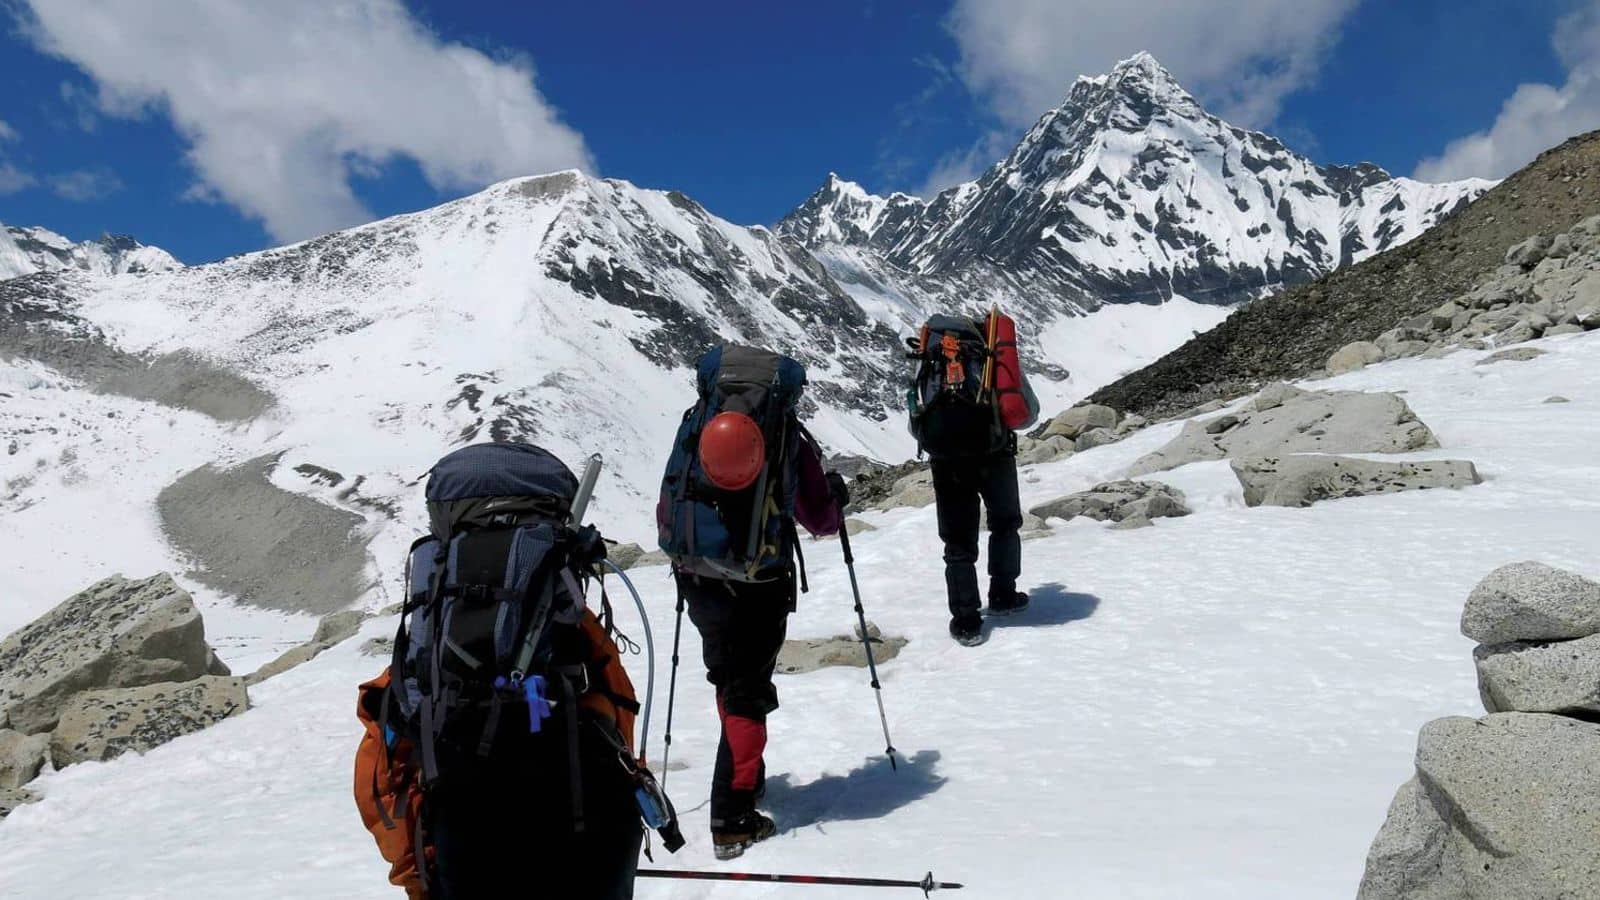 Trekking the Great Himalaya Trail, Nepal: A journey of discovery